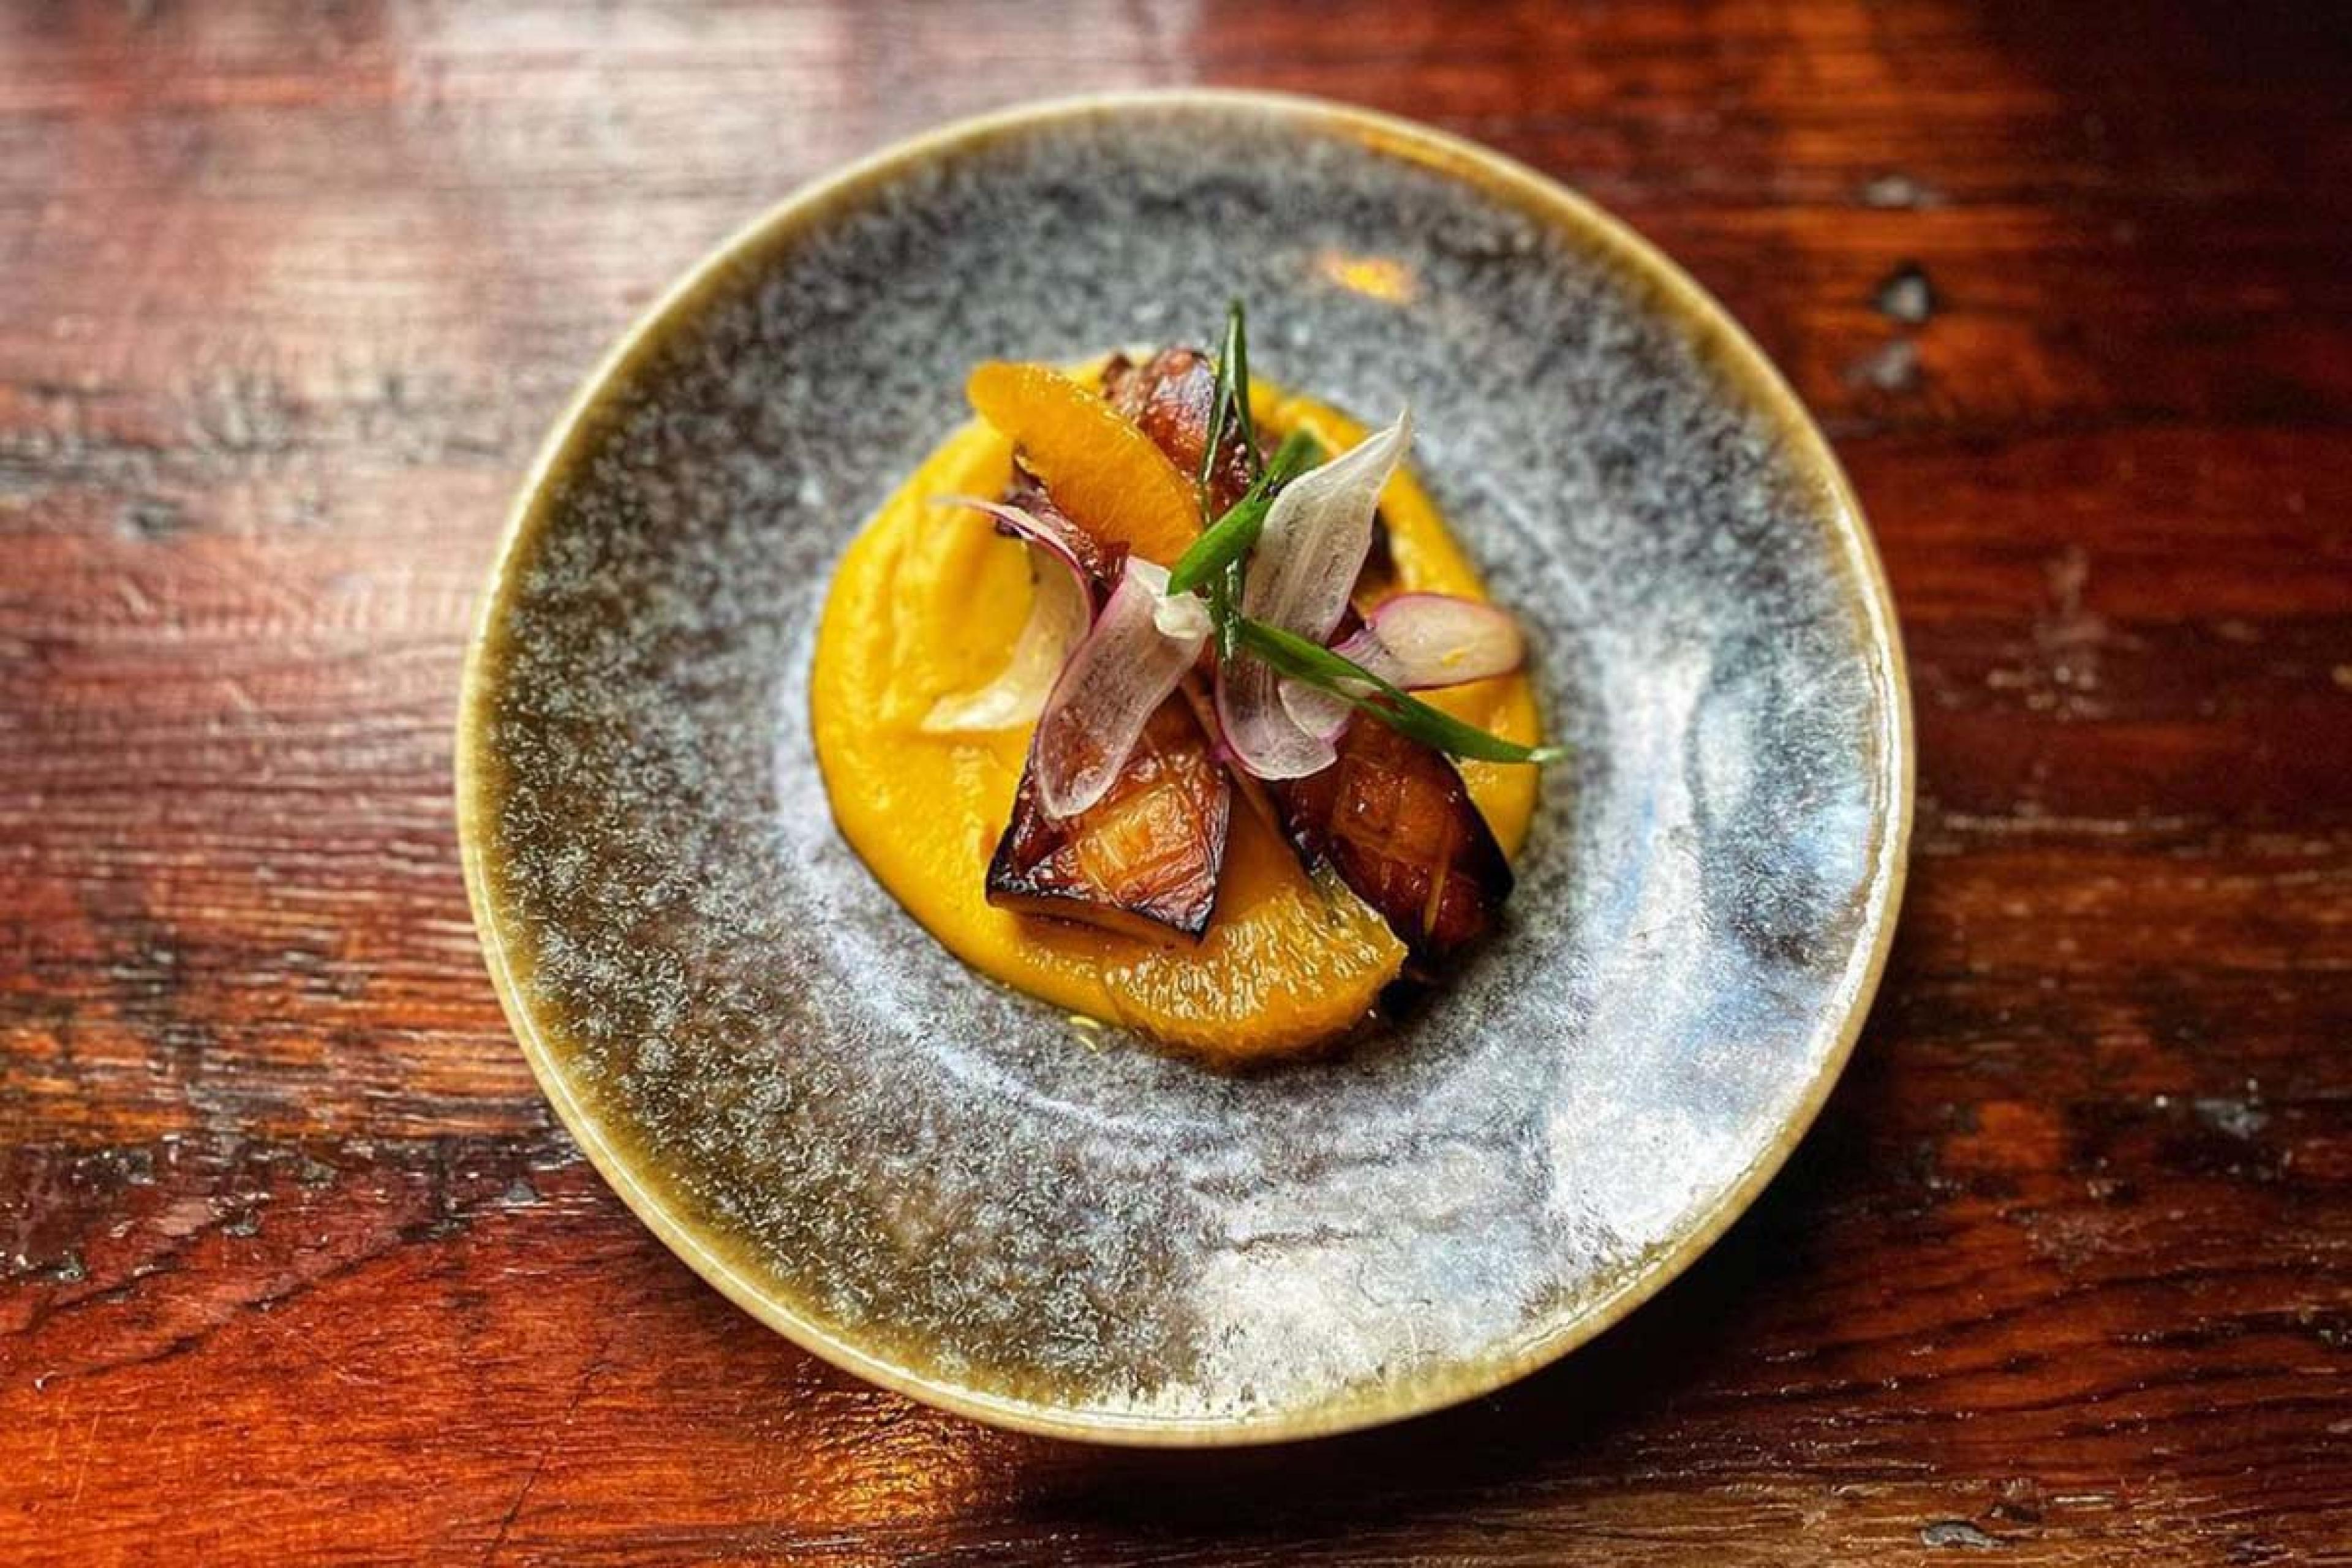 Pan-Roasted King Trumpet Mushroom with Satsuma and Butternut Squash Purée on a stone plate